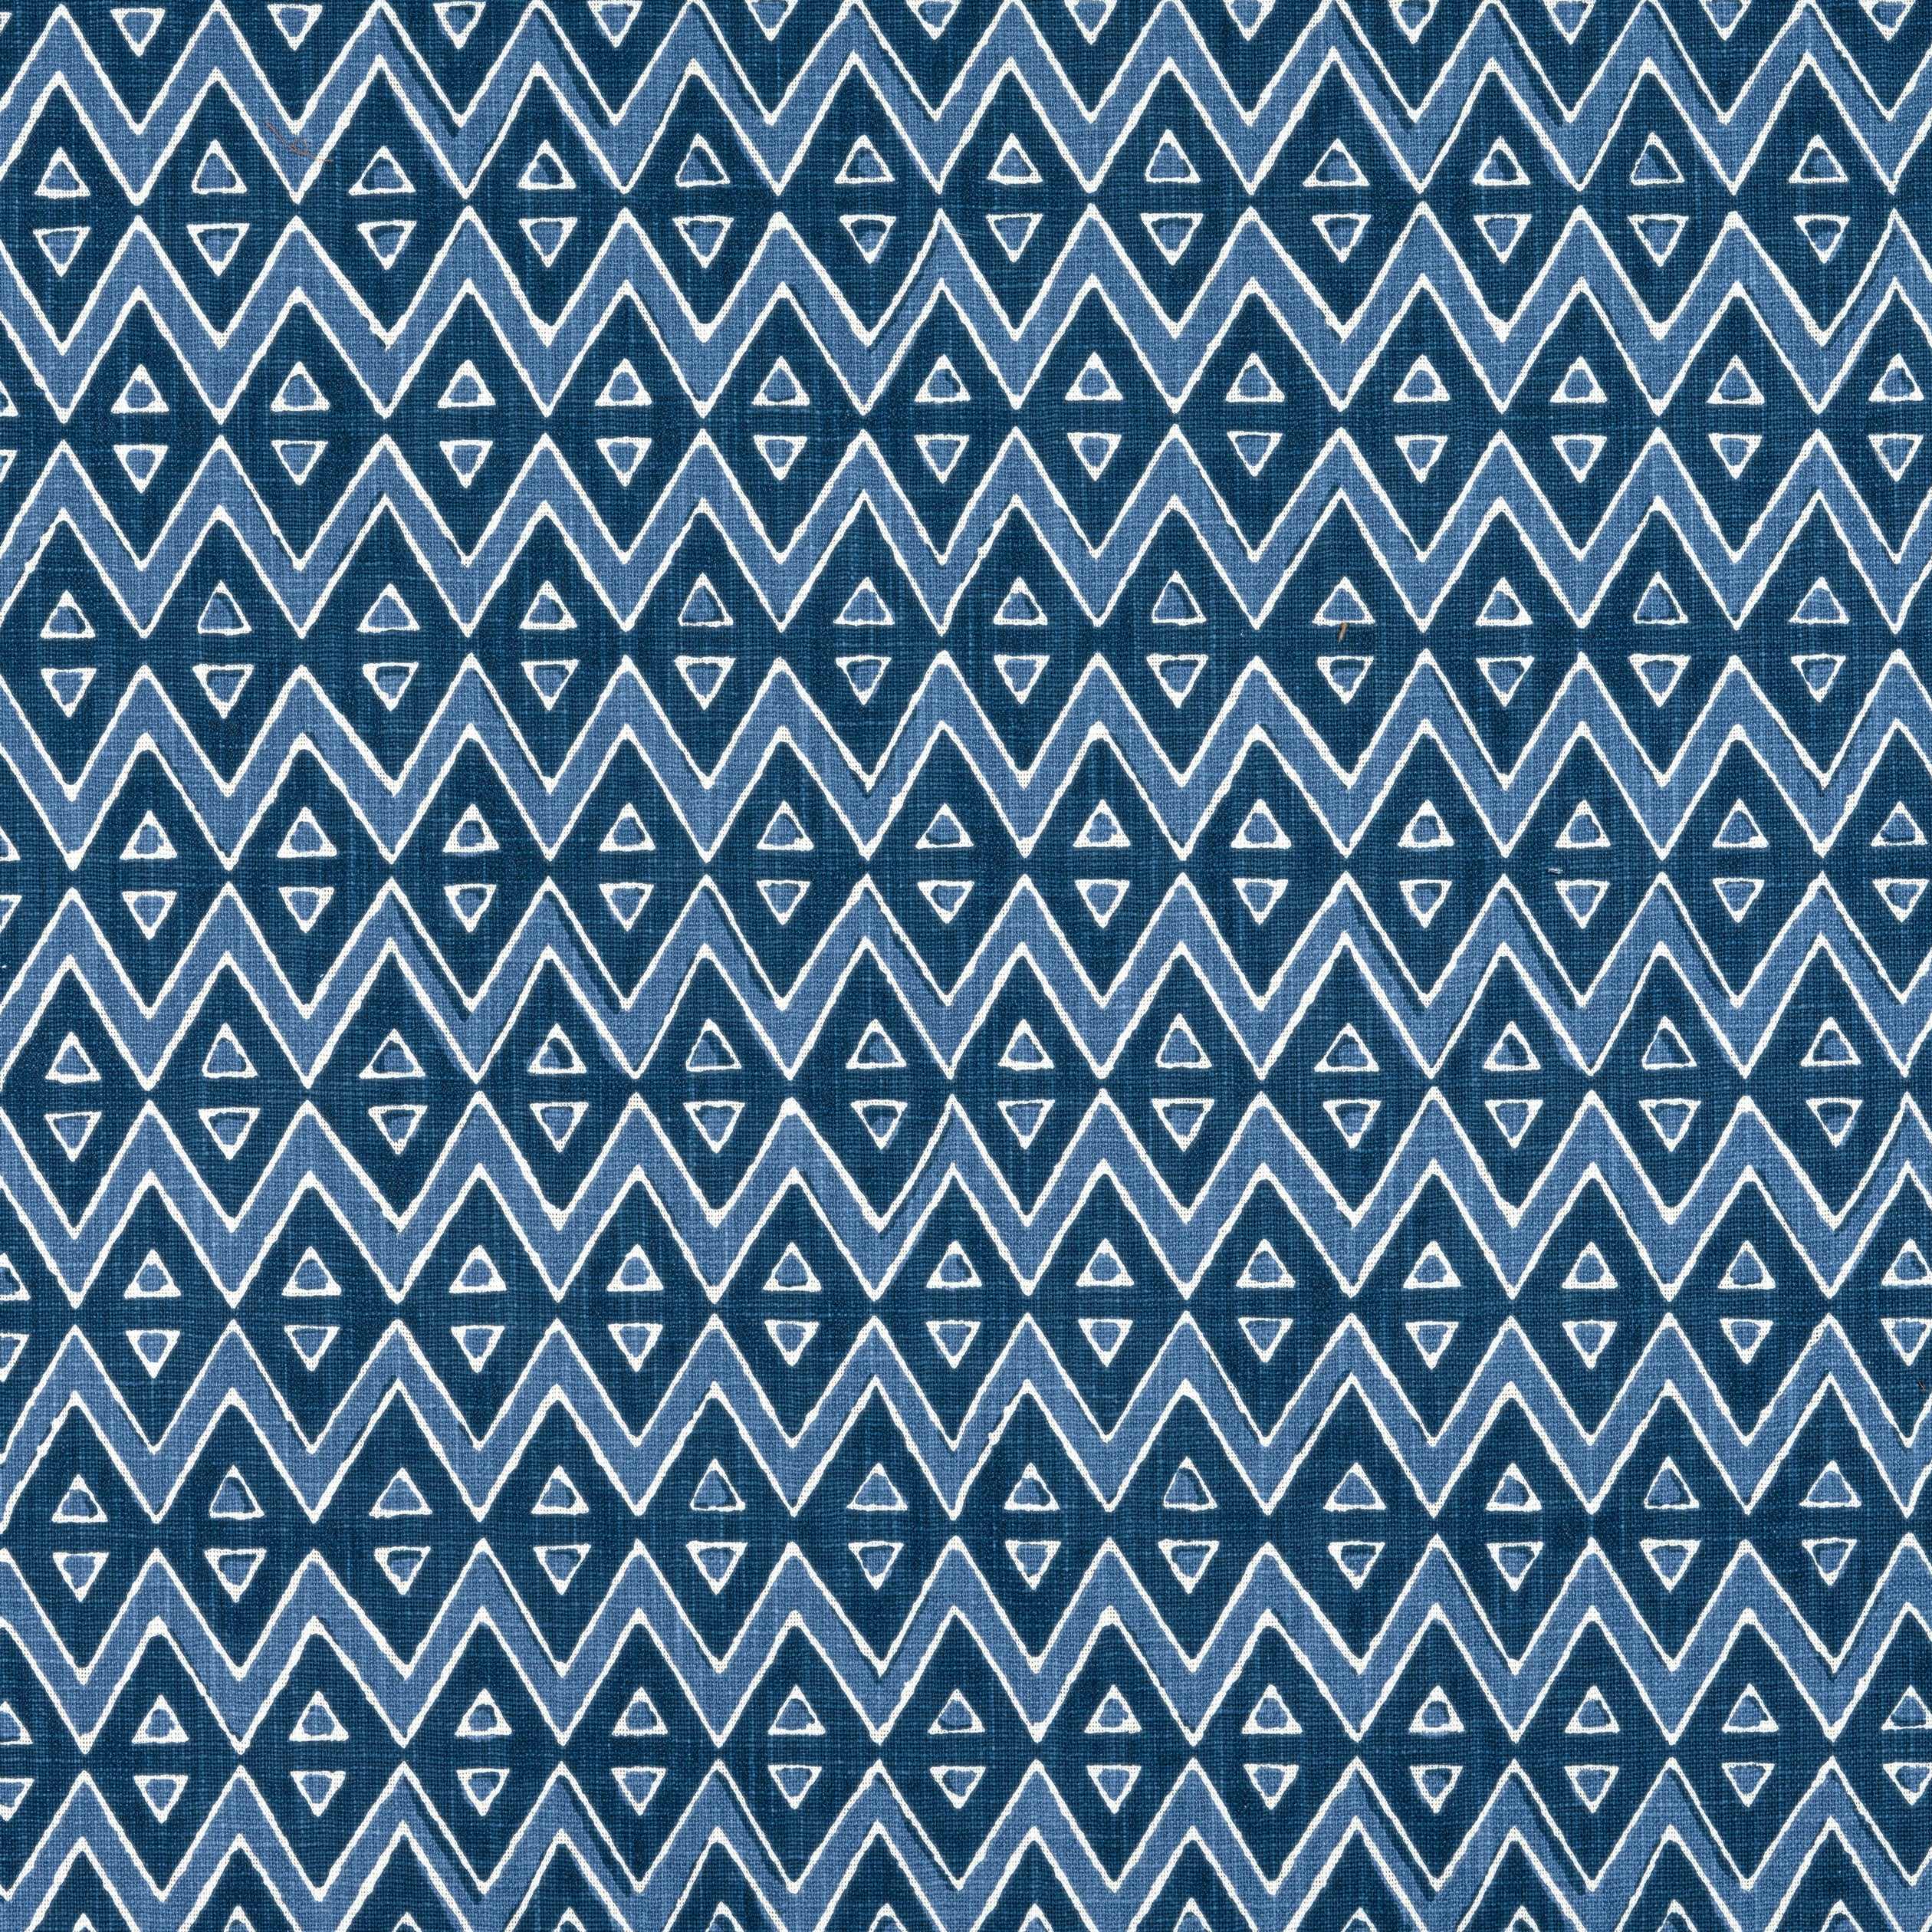 Tiburon fabric in navy color - pattern number F913237 - by Thibaut in the Mesa collection